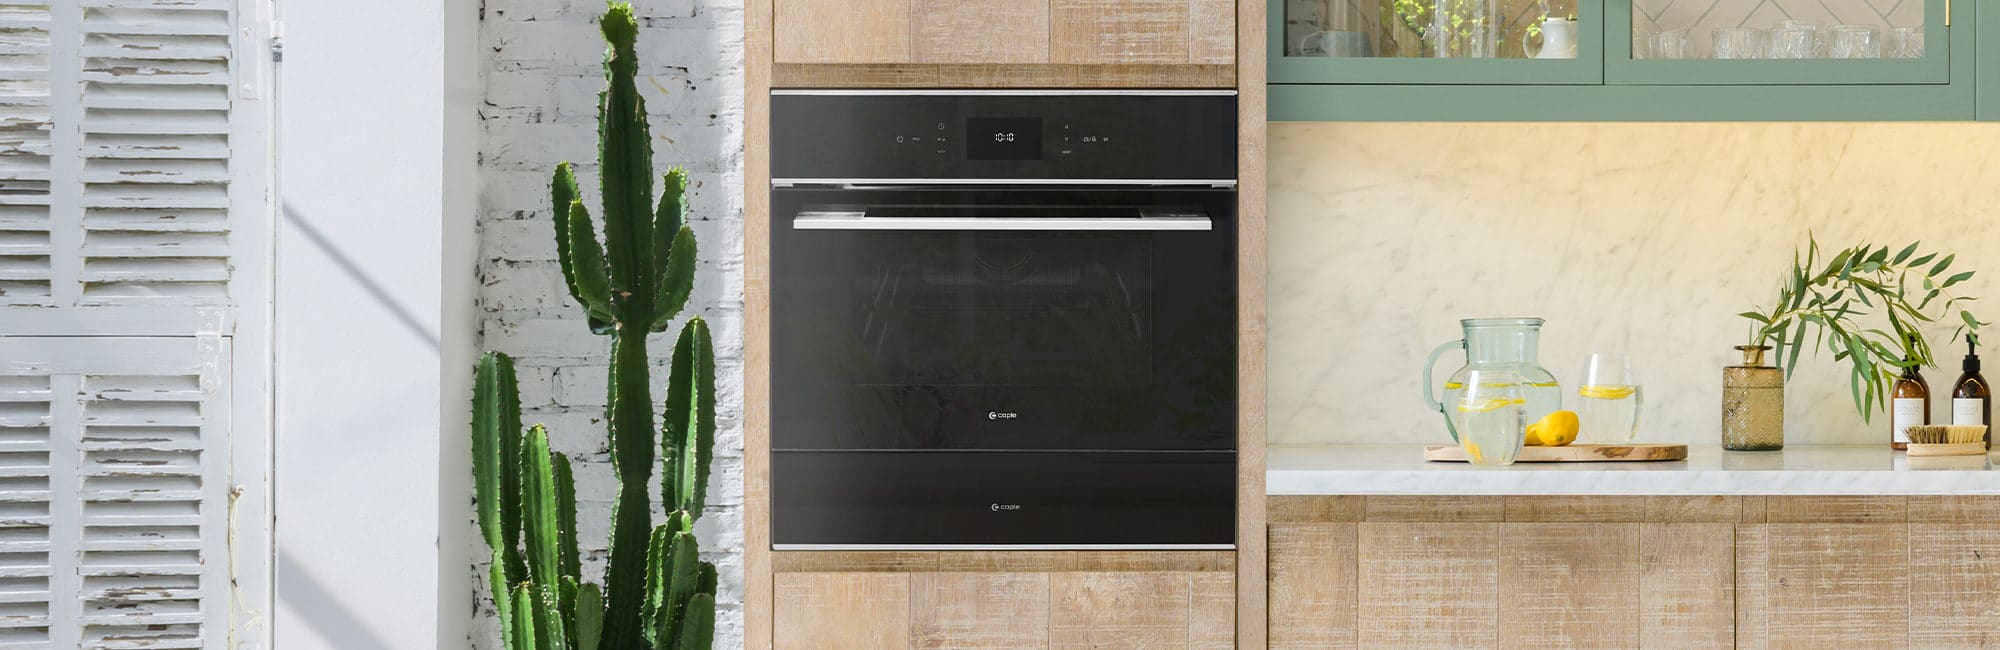 Built-in black glass combi microwave and steam oven